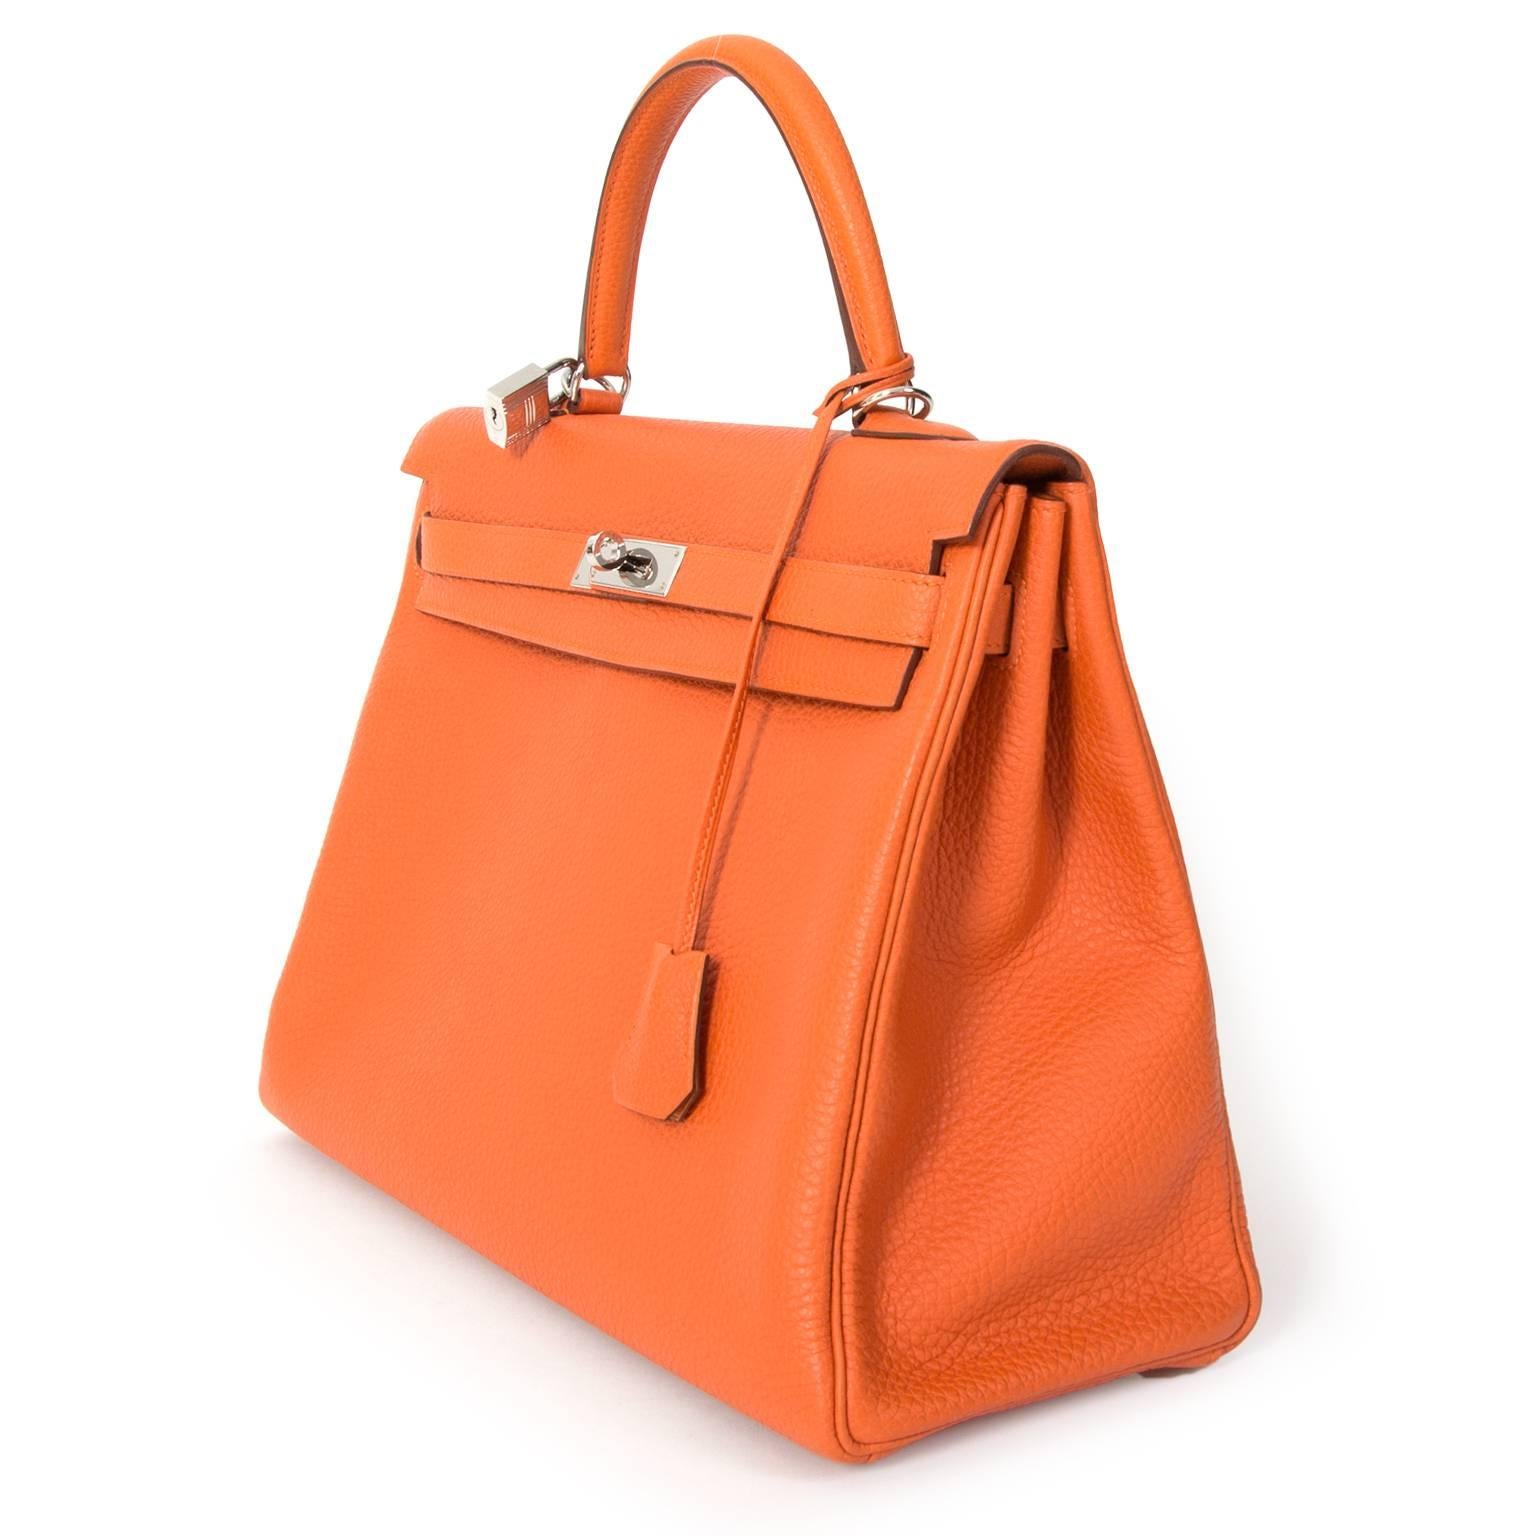 Brand new Hermes Sac Kelly Orange Retourne 35 Veau Togo in a bright orange hue. Very contemporary color for a timeless classic shape. Features silver hardware.

Comes with sleepers, lock, keys, strap and receipt (2011)
